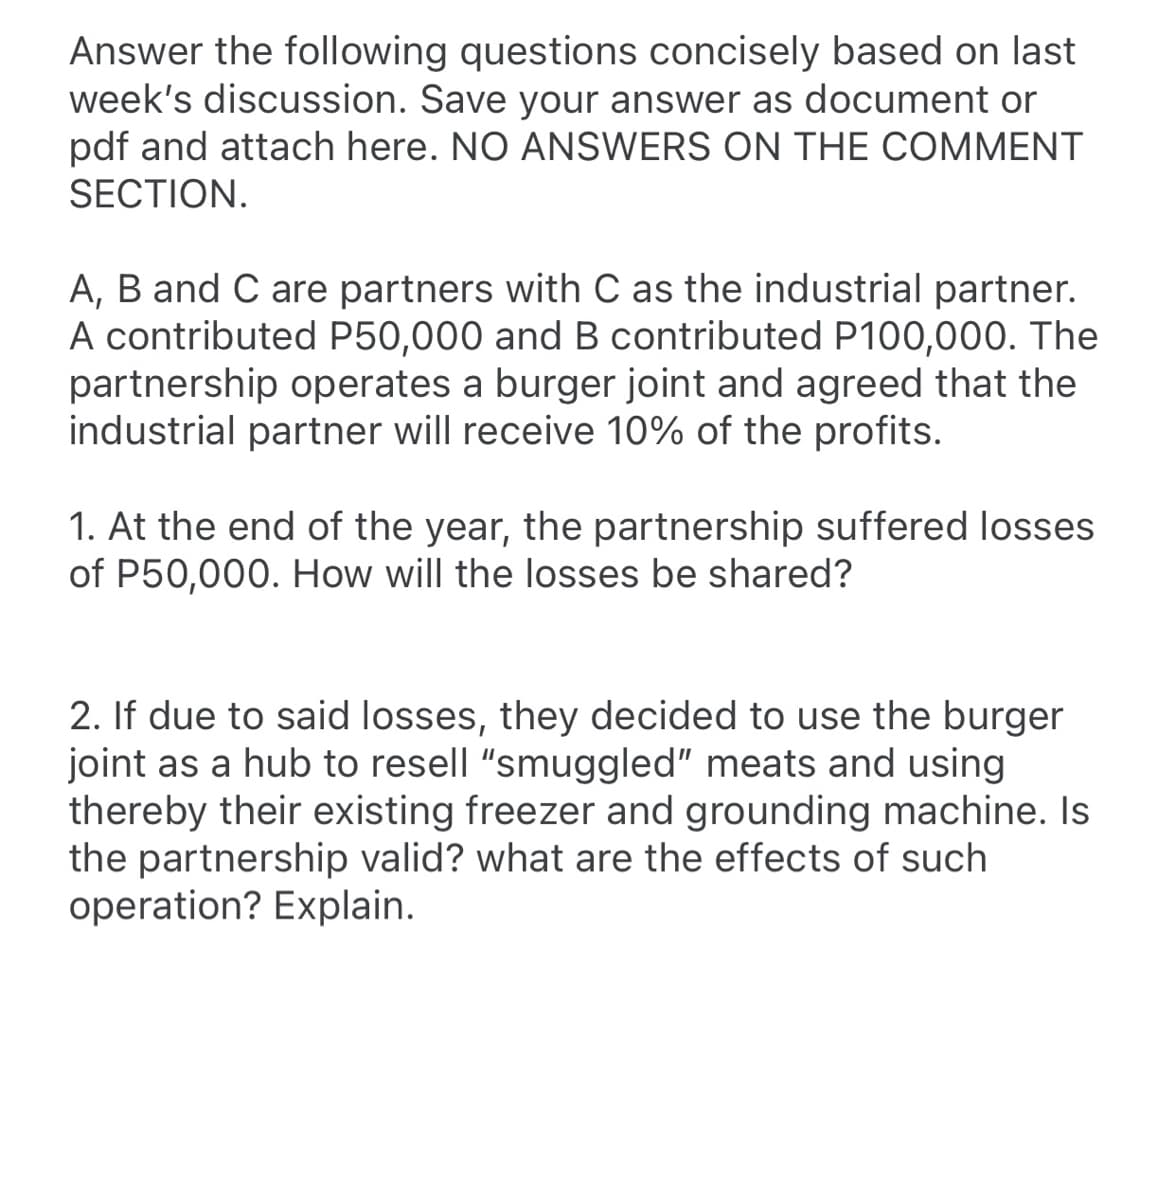 Answer the following questions concisely based on last
week's discussion. Save your answer as document or
pdf and attach here. NO ANSWERS ON THE COMMENT
SECTION.
A, B and C are partners with C as the industrial partner.
A contributed P50,000 and B contributed P100,000. The
partnership operates a burger joint and agreed that the
industrial partner will receive 10% of the profits.
1. At the end of the year, the partnership suffered losses
of P50,000. How will the losses be shared?
2. If due to said losses, they decided to use the burger
joint as a hub to resell "smuggled" meats and using
thereby their existing freezer and grounding machine. Is
the partnership valid? what are the effects of such
operation? Explain.
